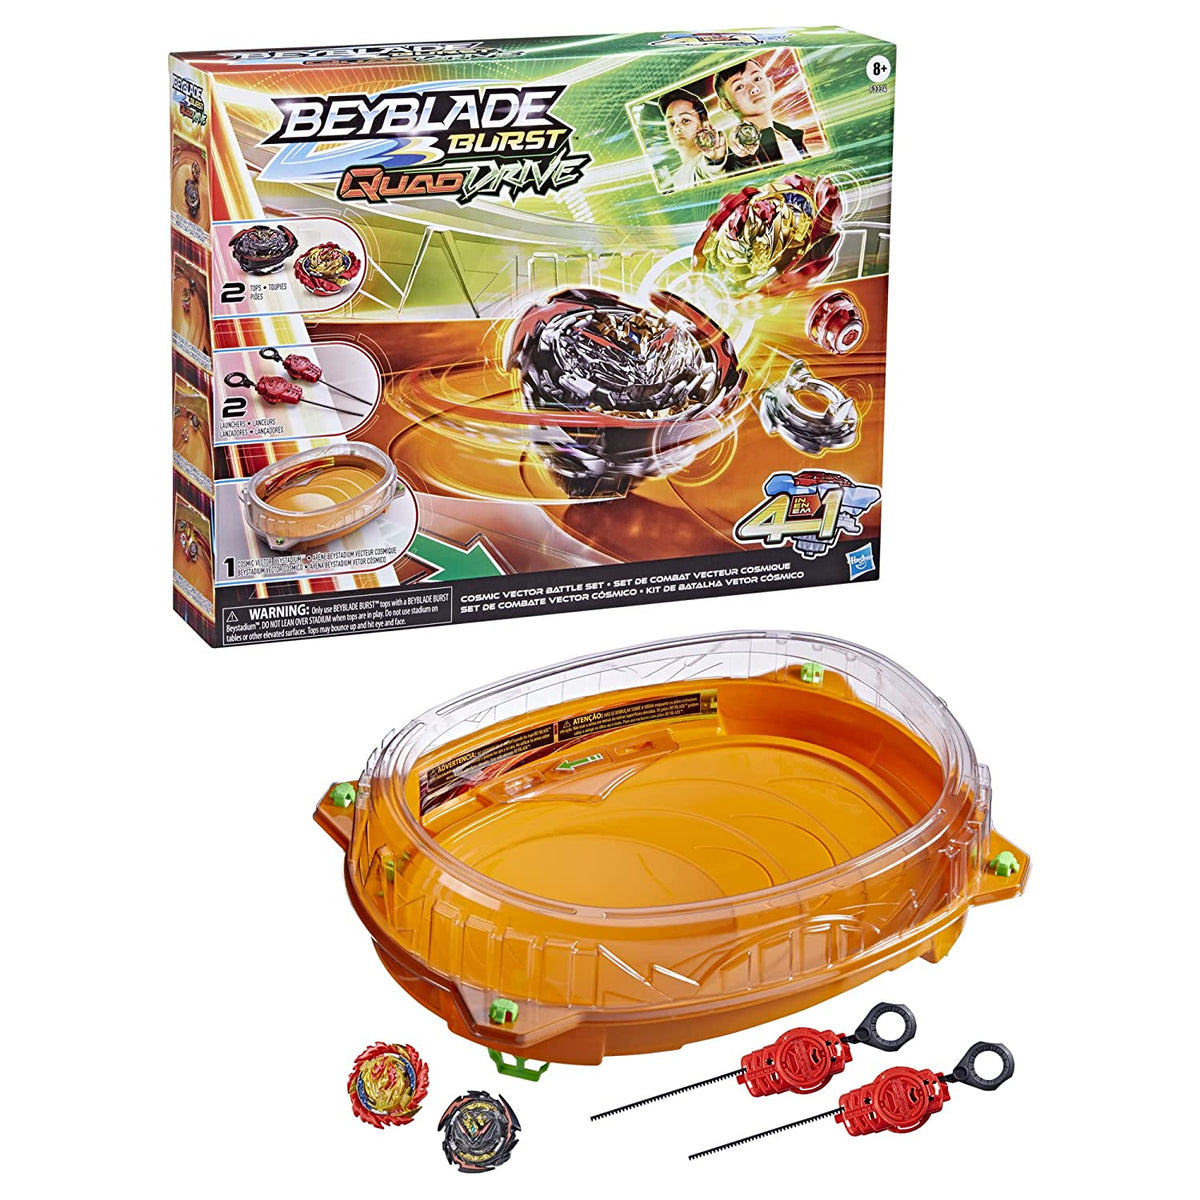 Beyblade Burst QuadDrive Cosmic Vector Battle Set with Beystadium, 2 Battling Top Toys and 2 Launchers for Ages 8 and Up